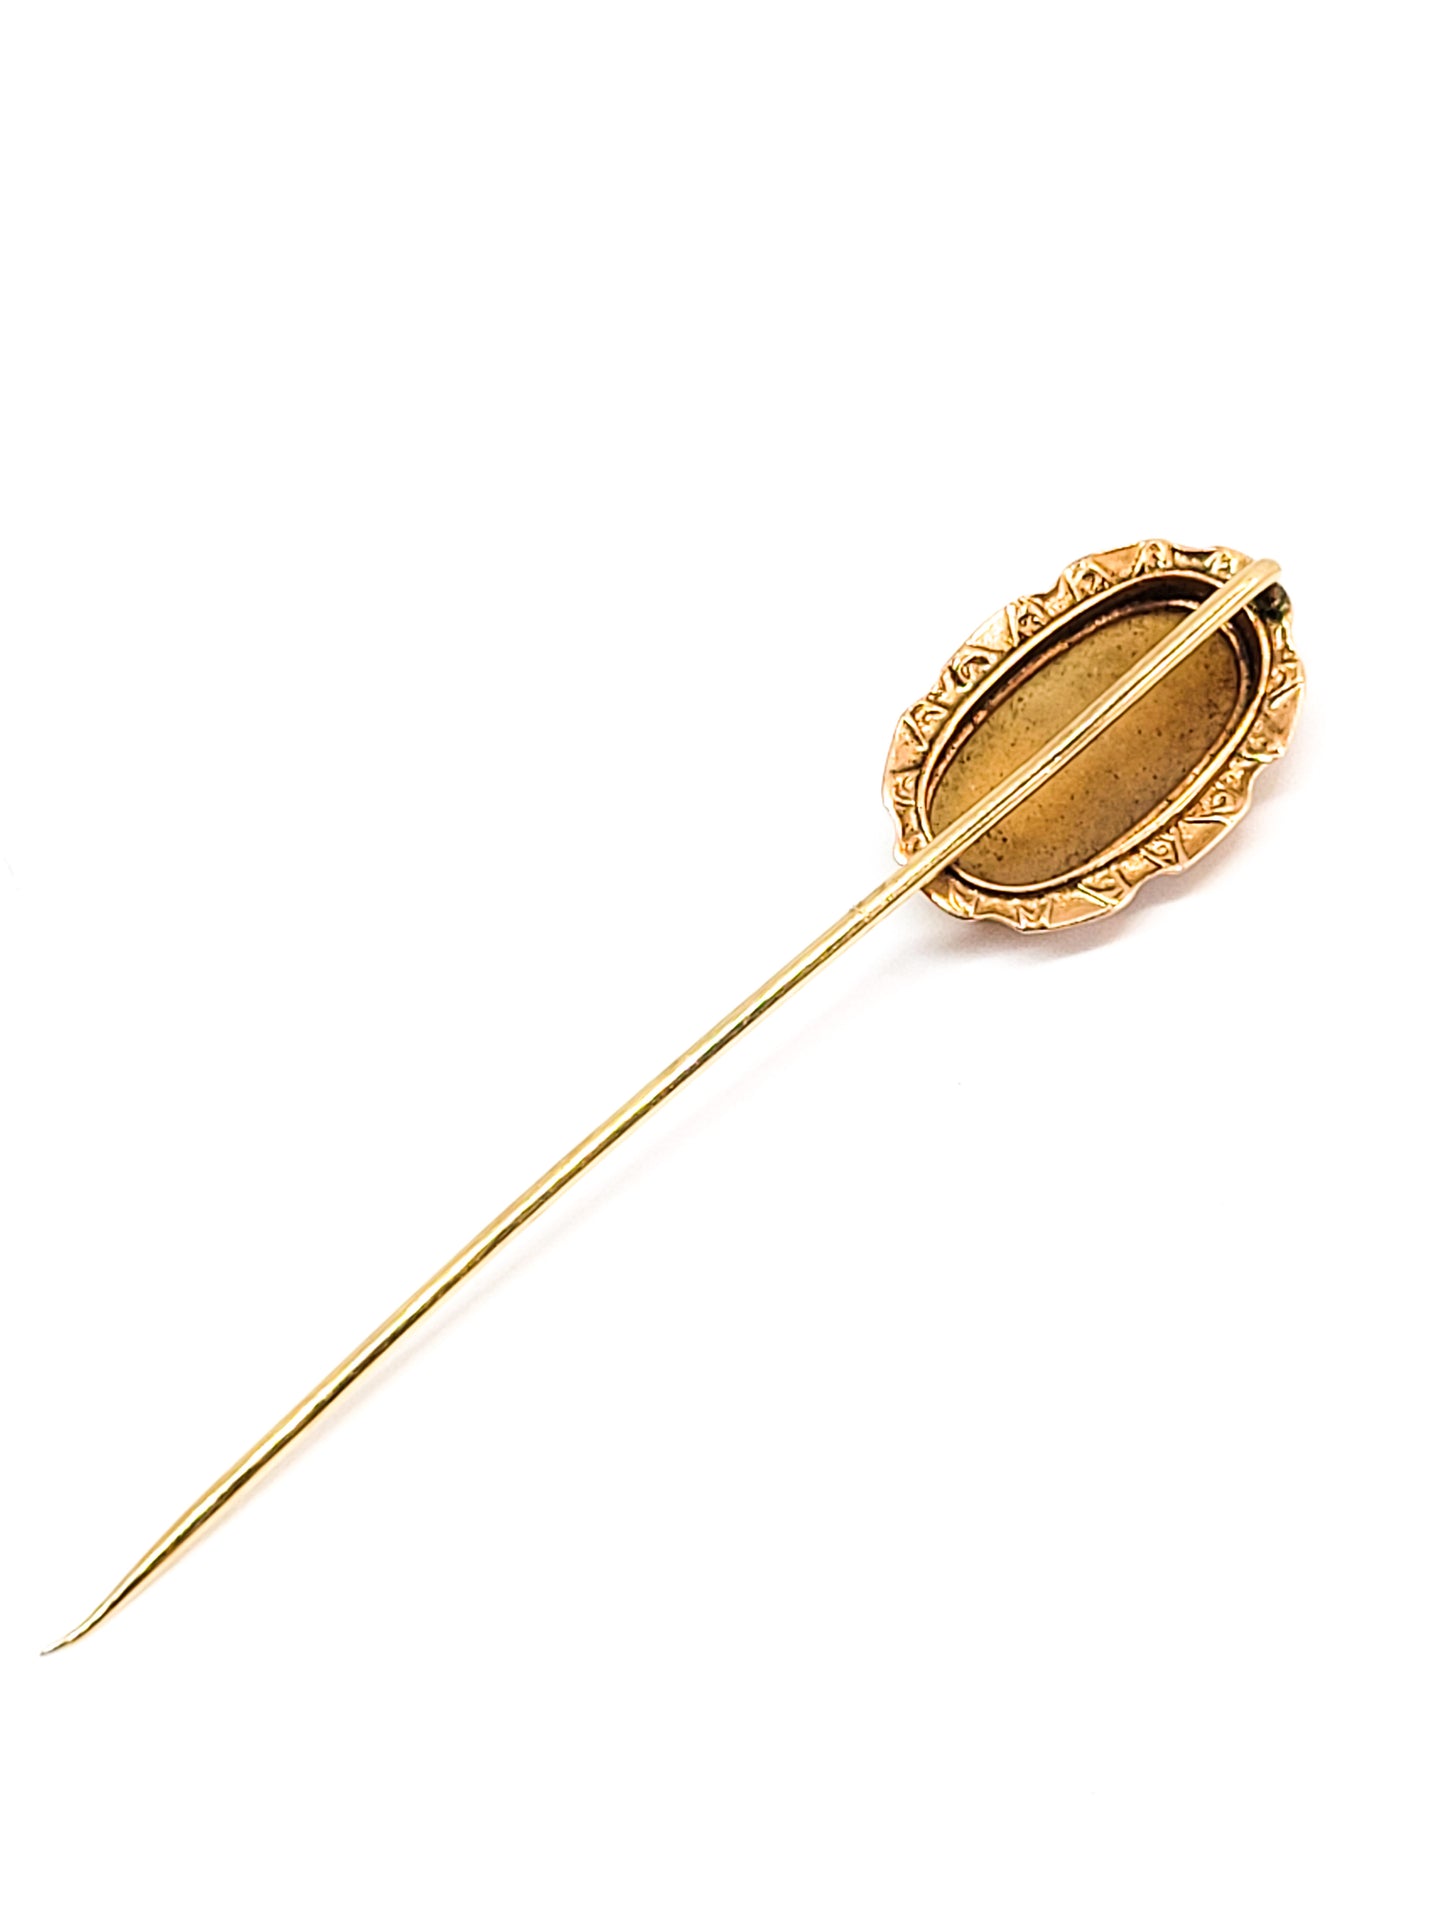 Estate Cameo Carved shell 10kt yellow gold antique stick pin lapel pin